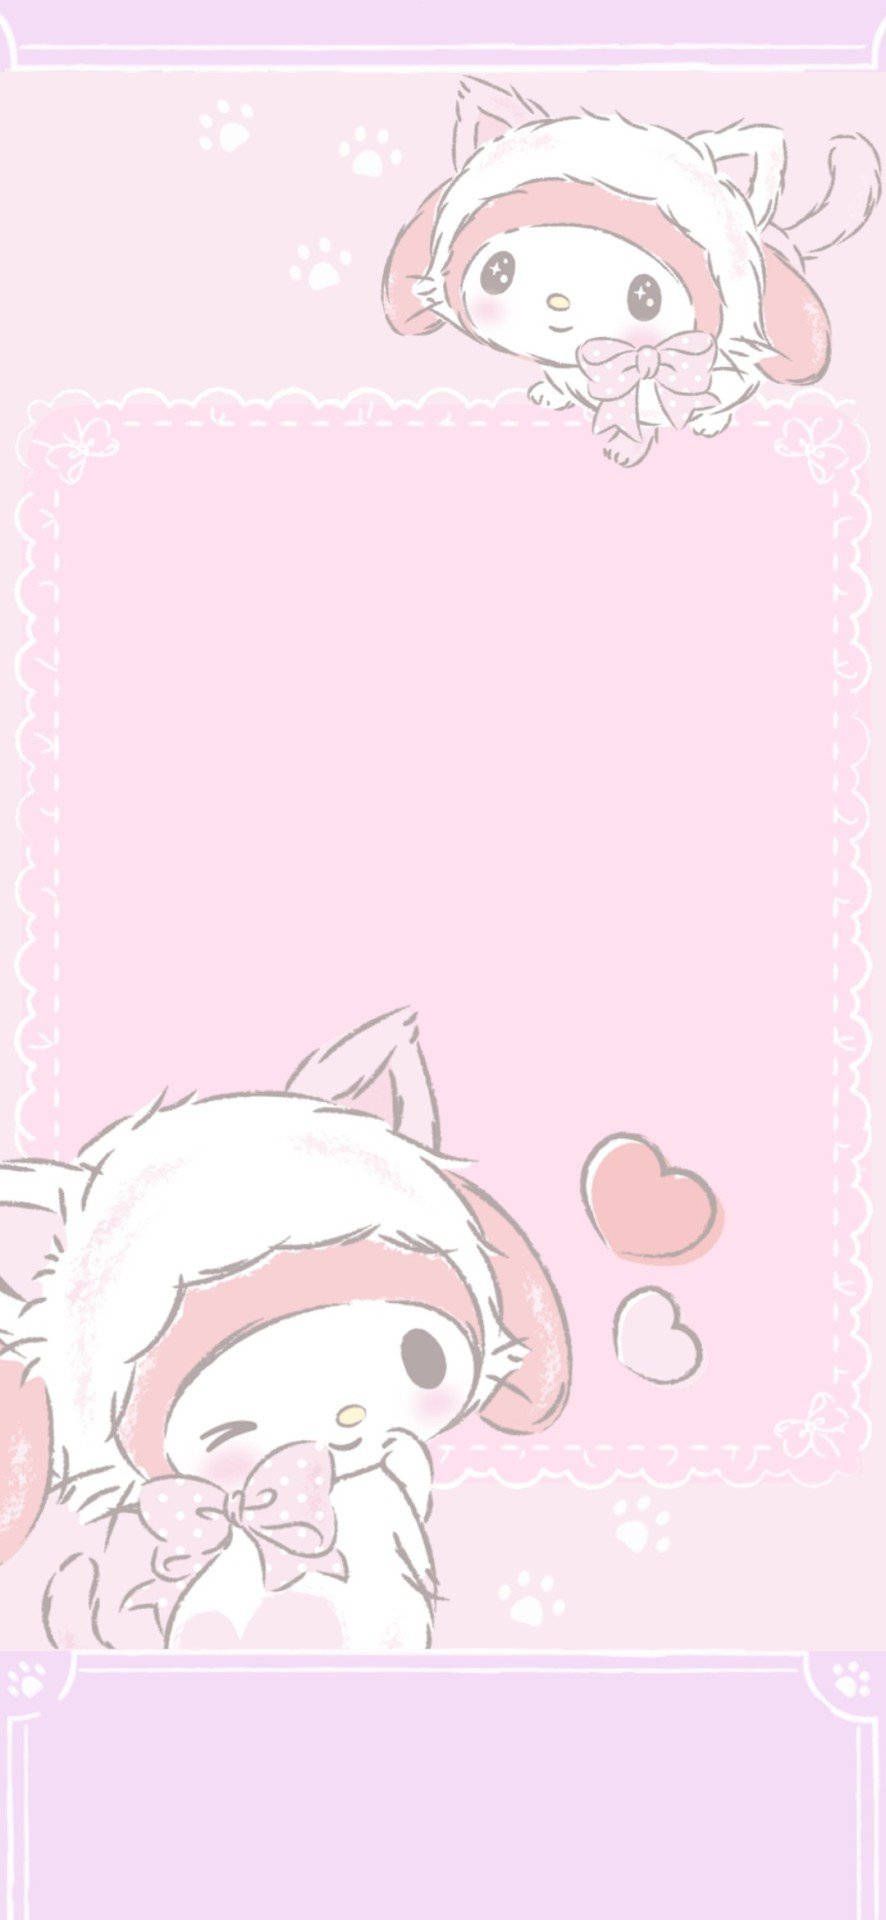 IPhone wallpaper background with cute pink cat and dog - Sanrio